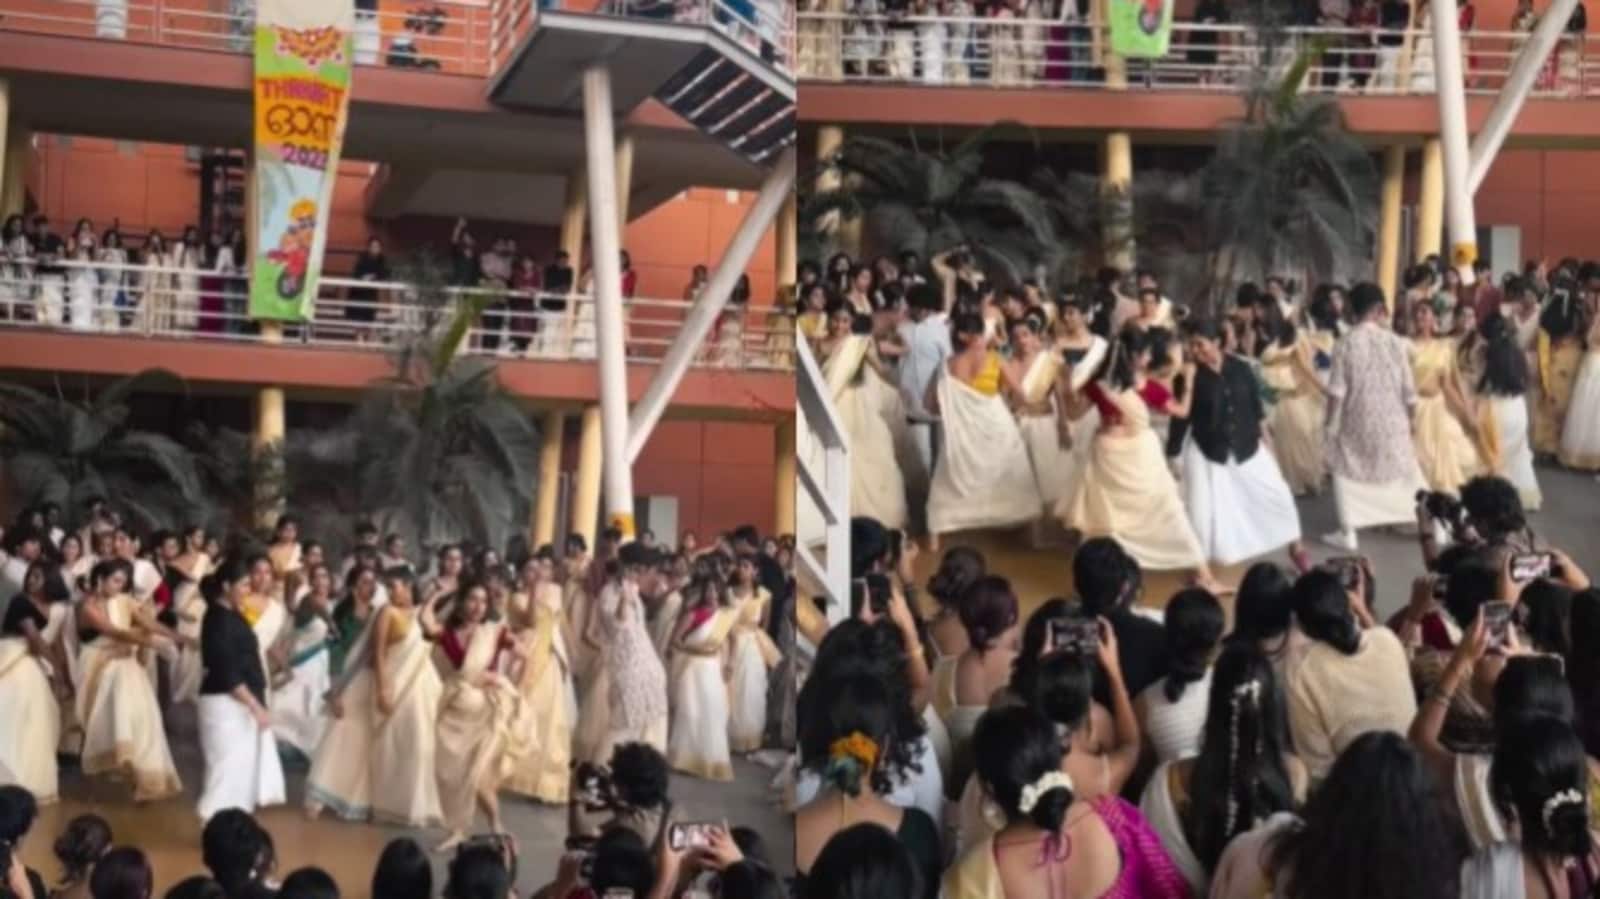 College students dance to Oo Antava, set stage on fire. Watch